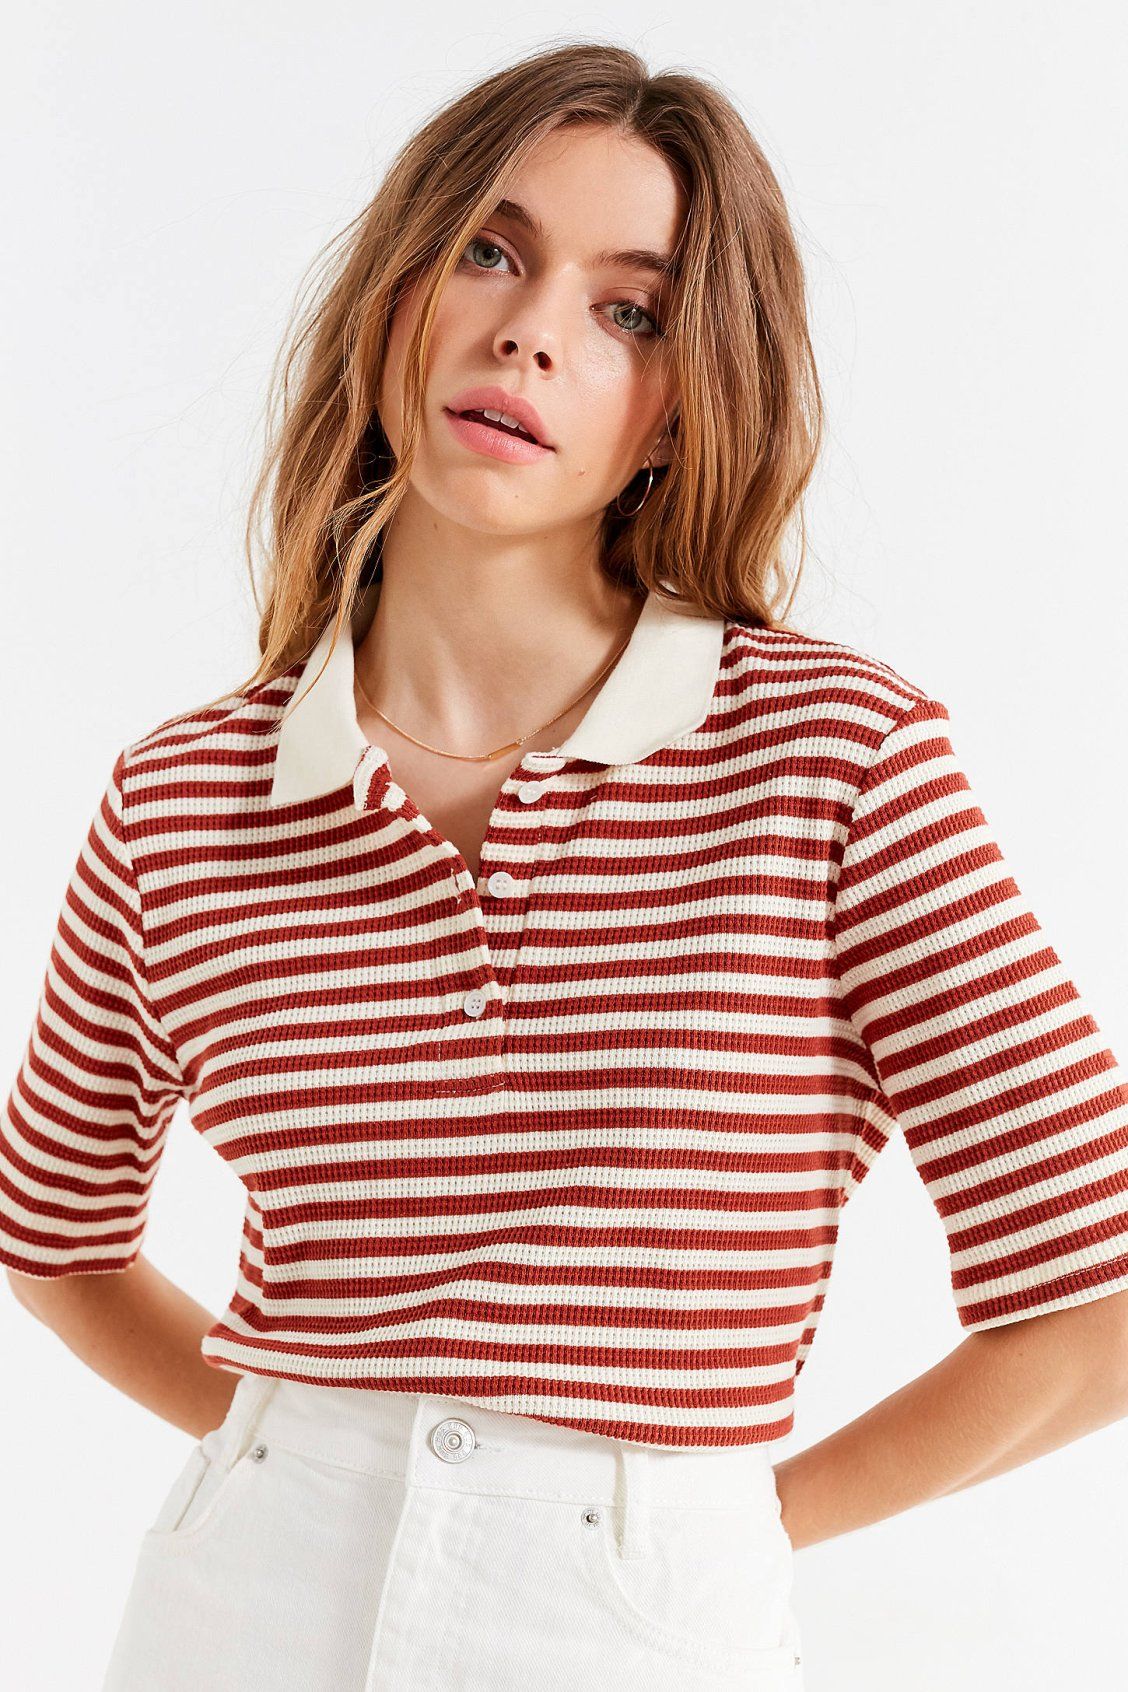 How To Style Striped Polo Shirt